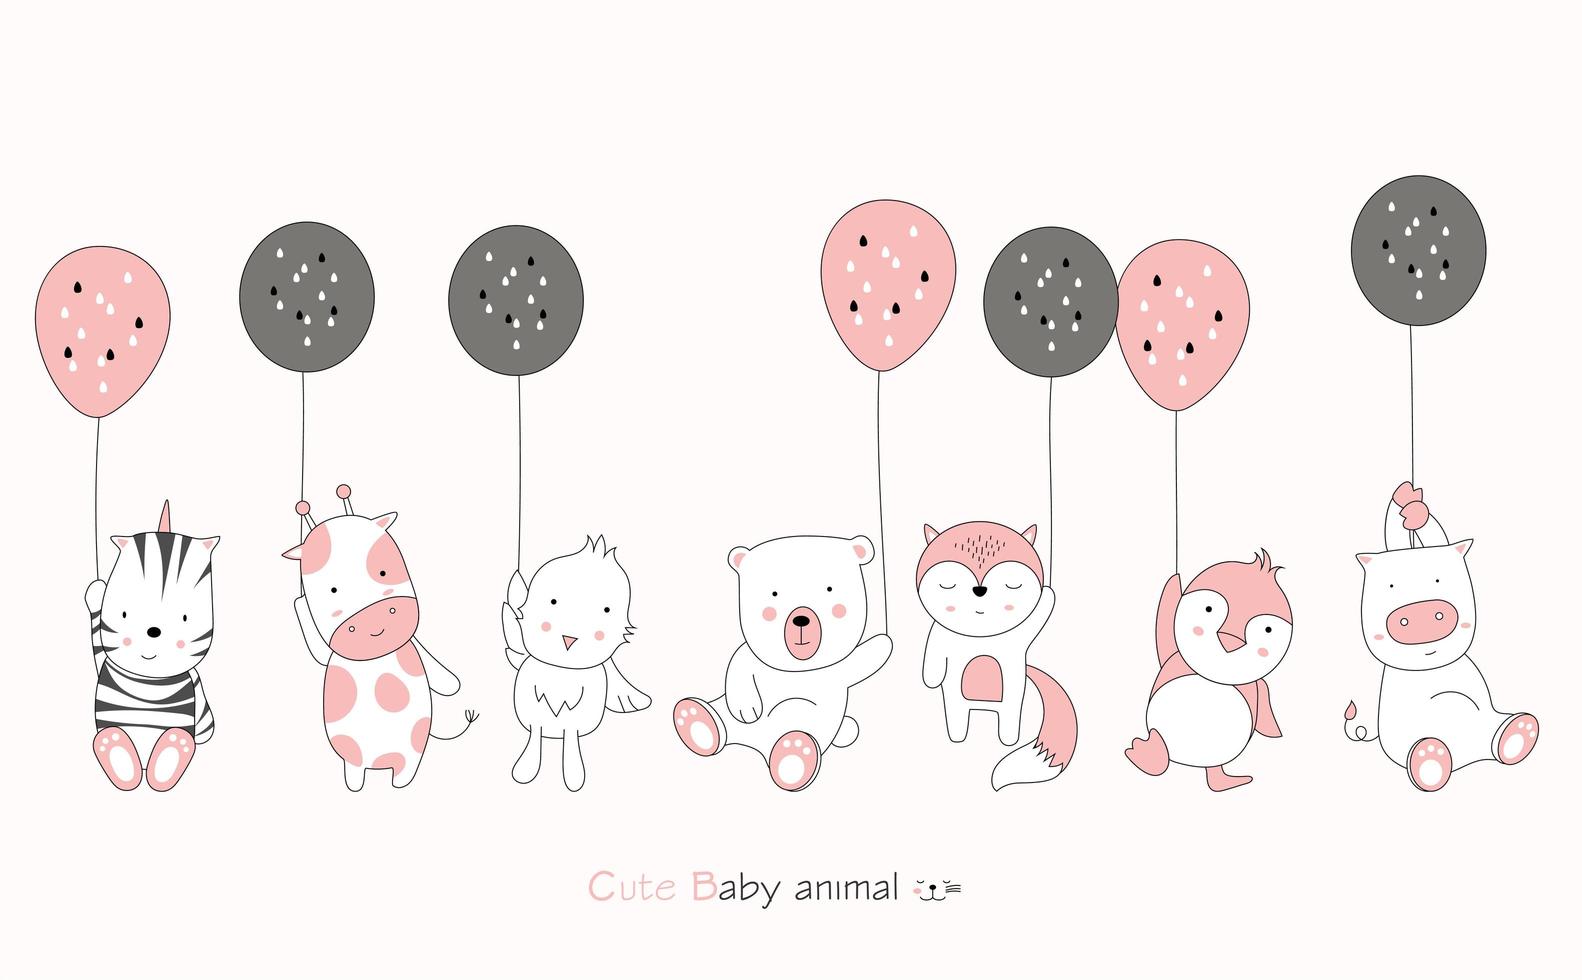 Cartoon cute baby animals with balloons on pink background. Hand drawn cartoon style. vector